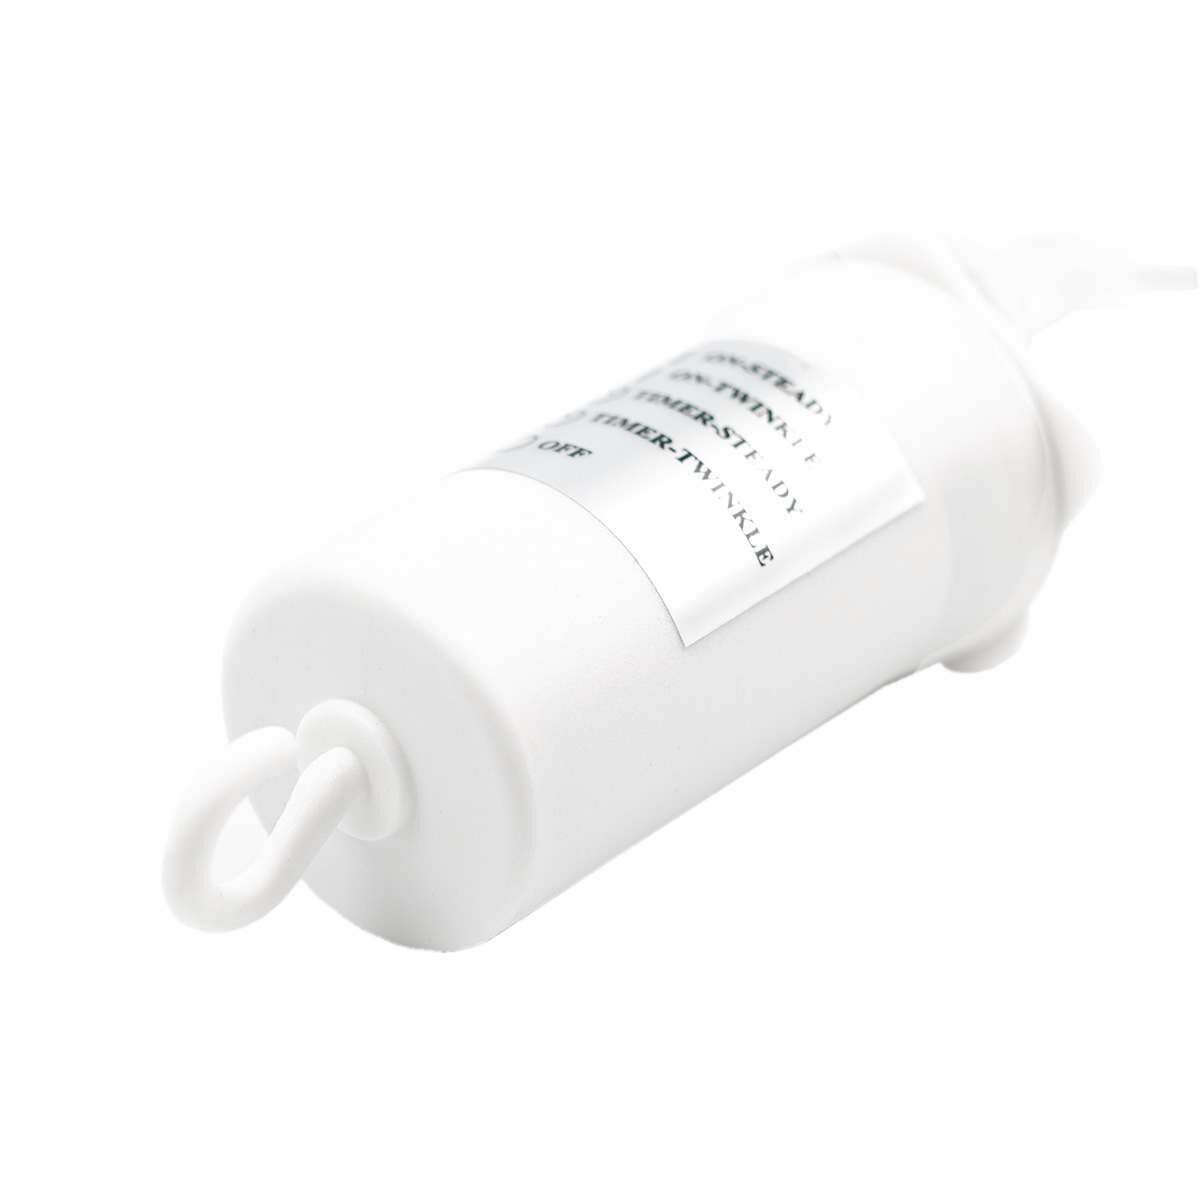 ConnectGo® AA Battery Box, White Rubber Cable image 2